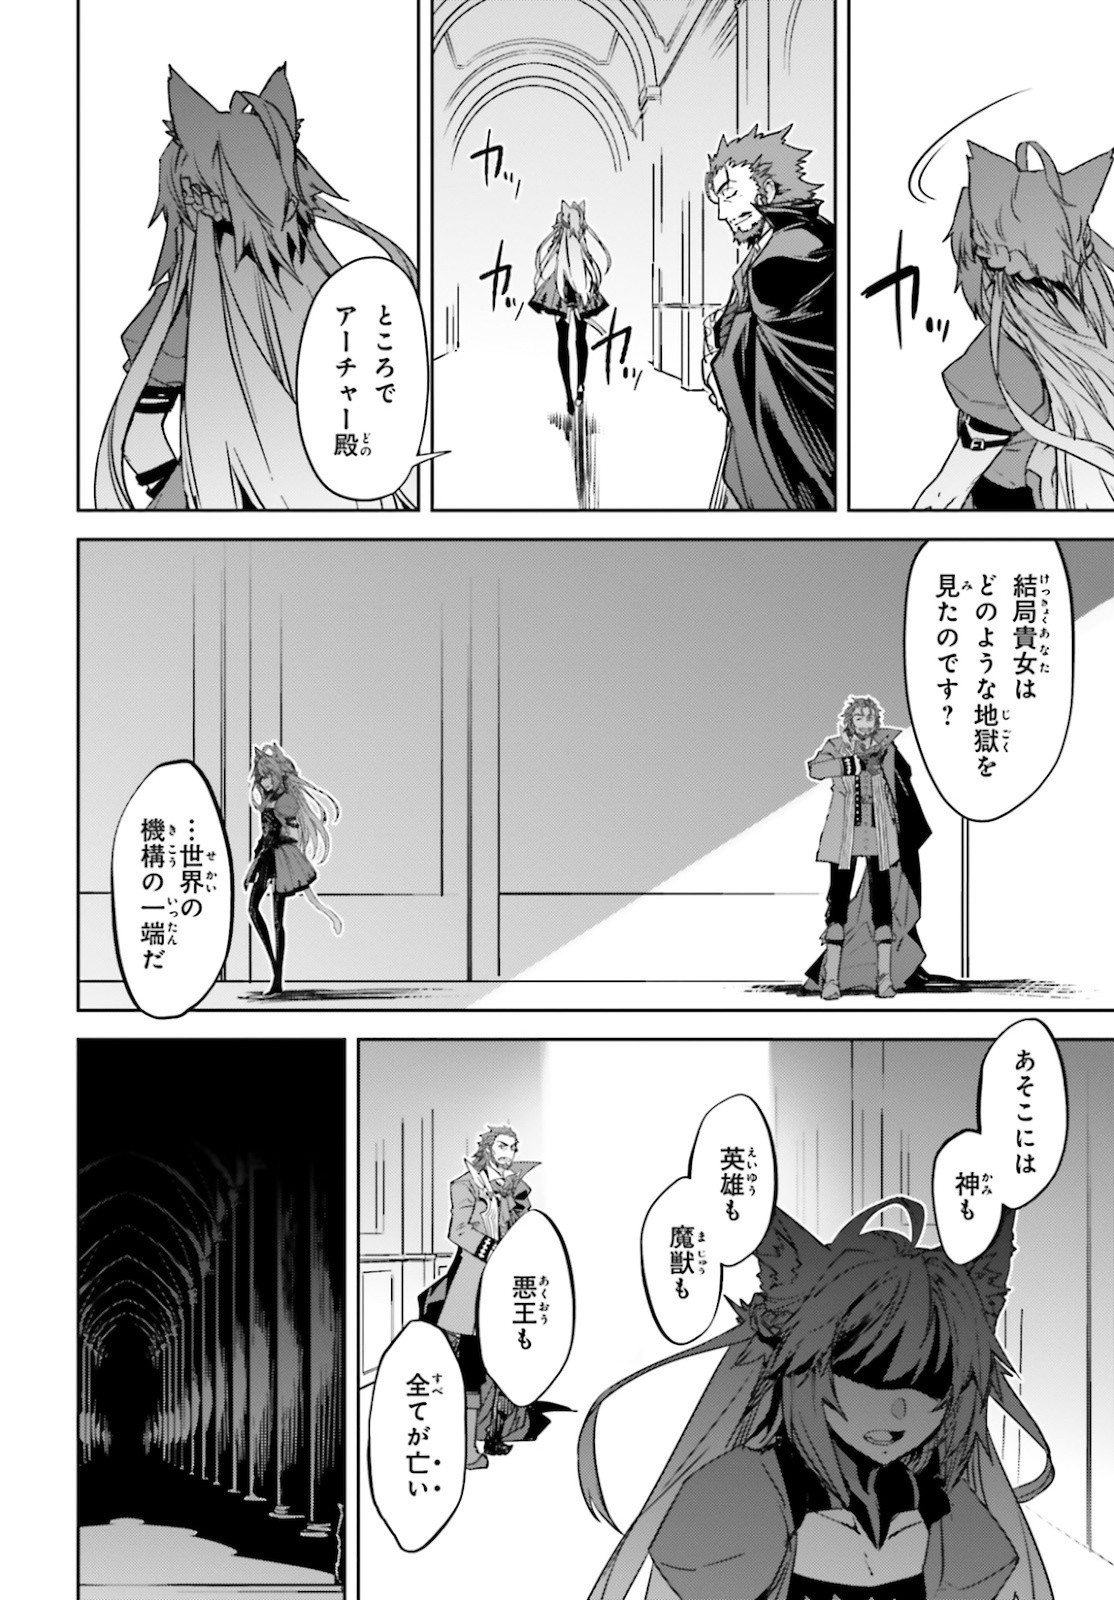 Fate-Apocrypha - Chapter 49 - Page 24